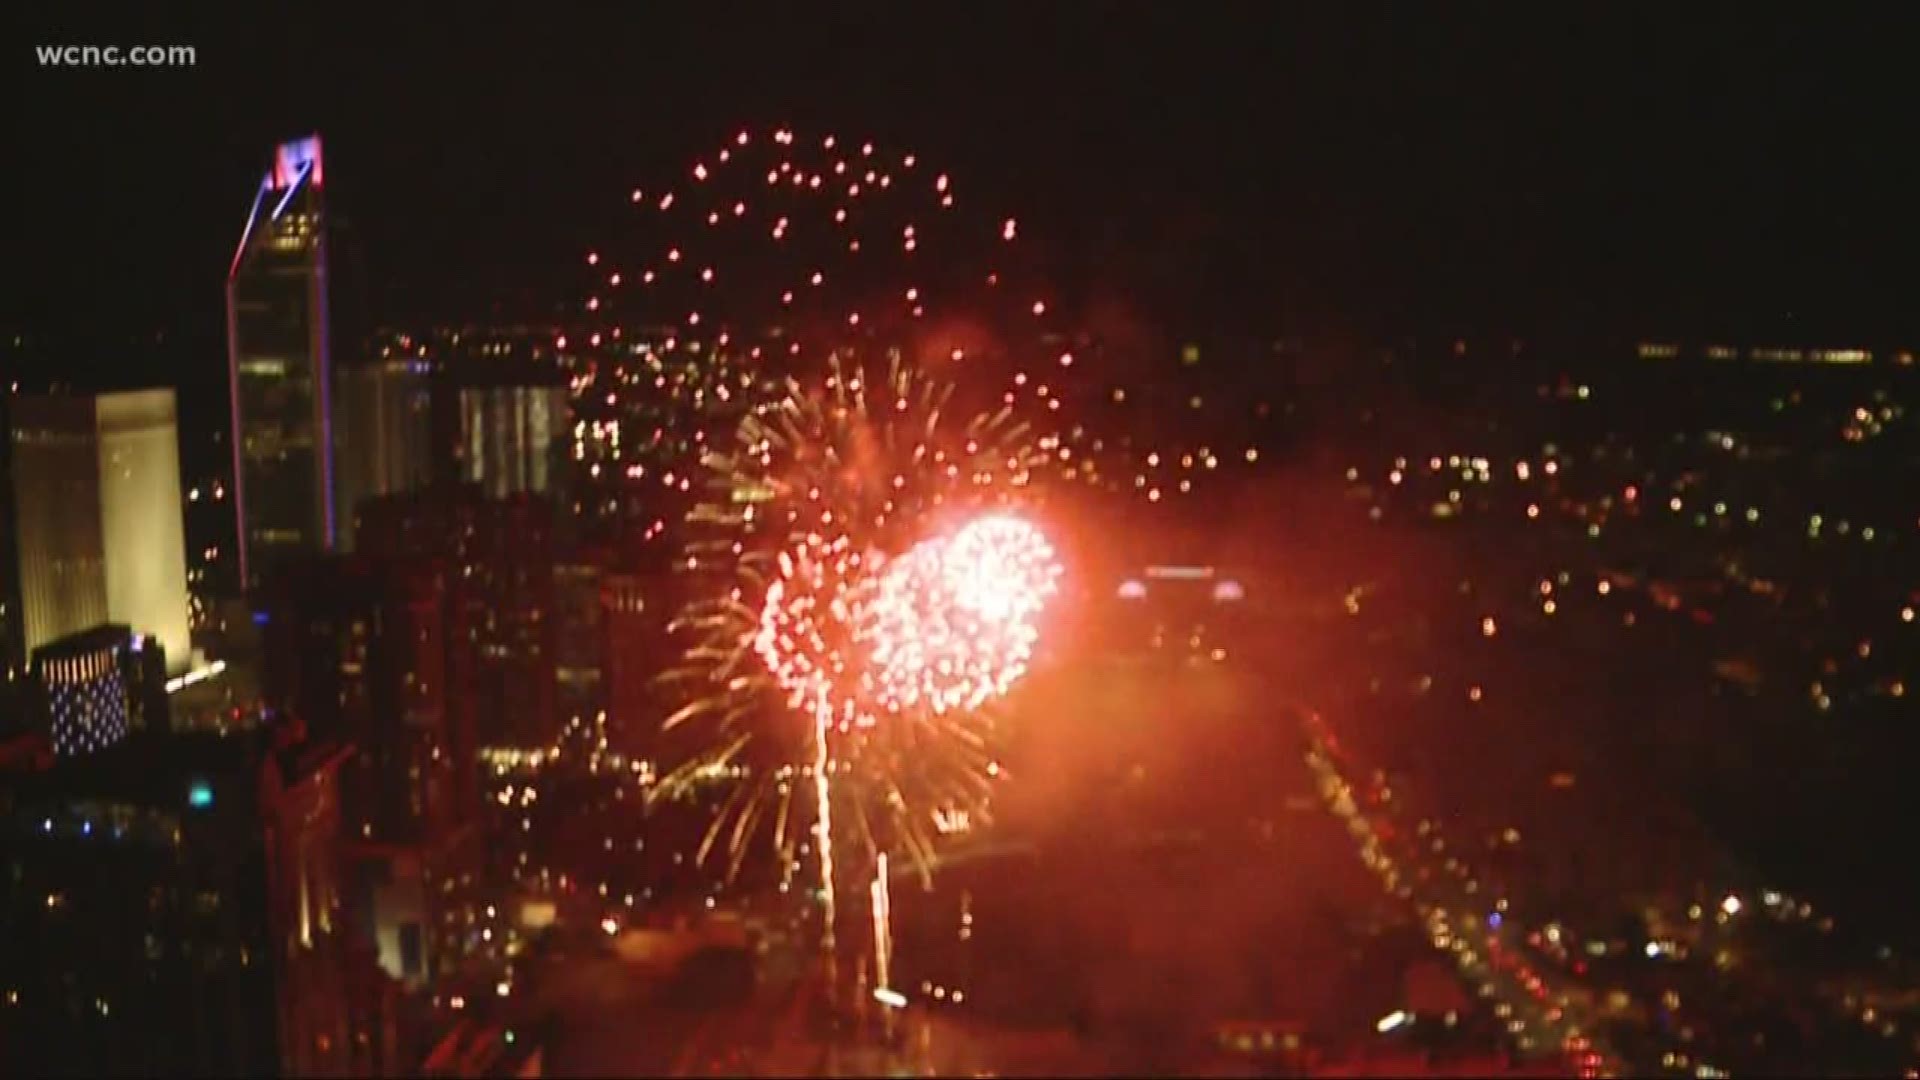 42nd annual fireworks show light up uptown Charlotte skies